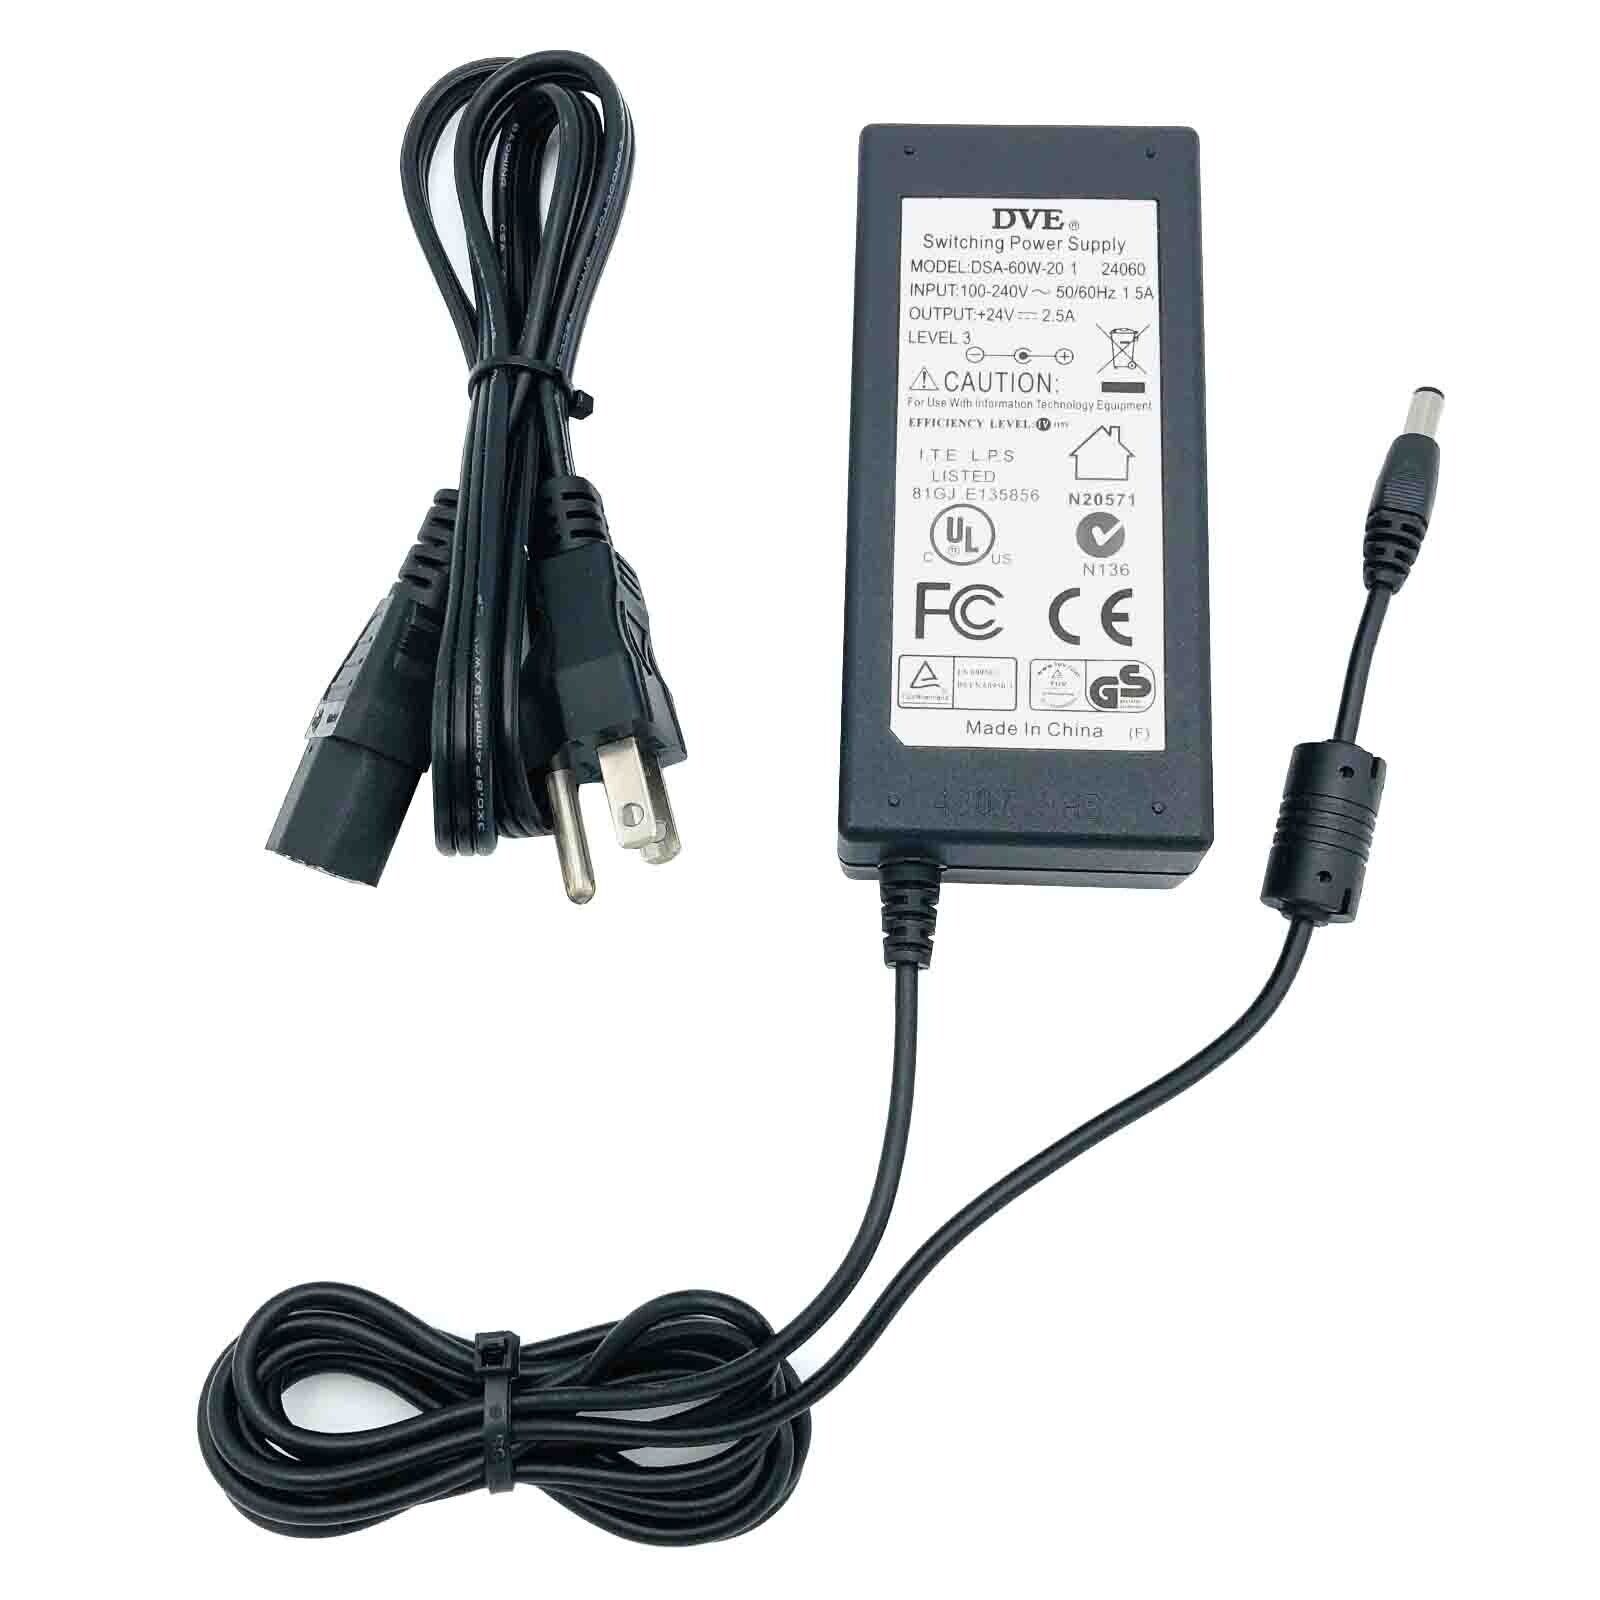 *Brand NEW*Genuine DVE 24V 2.5A AC Adapter for Mikrotik Routerboard RB2011UiAS-2HnD-IN Power Supply - Click Image to Close